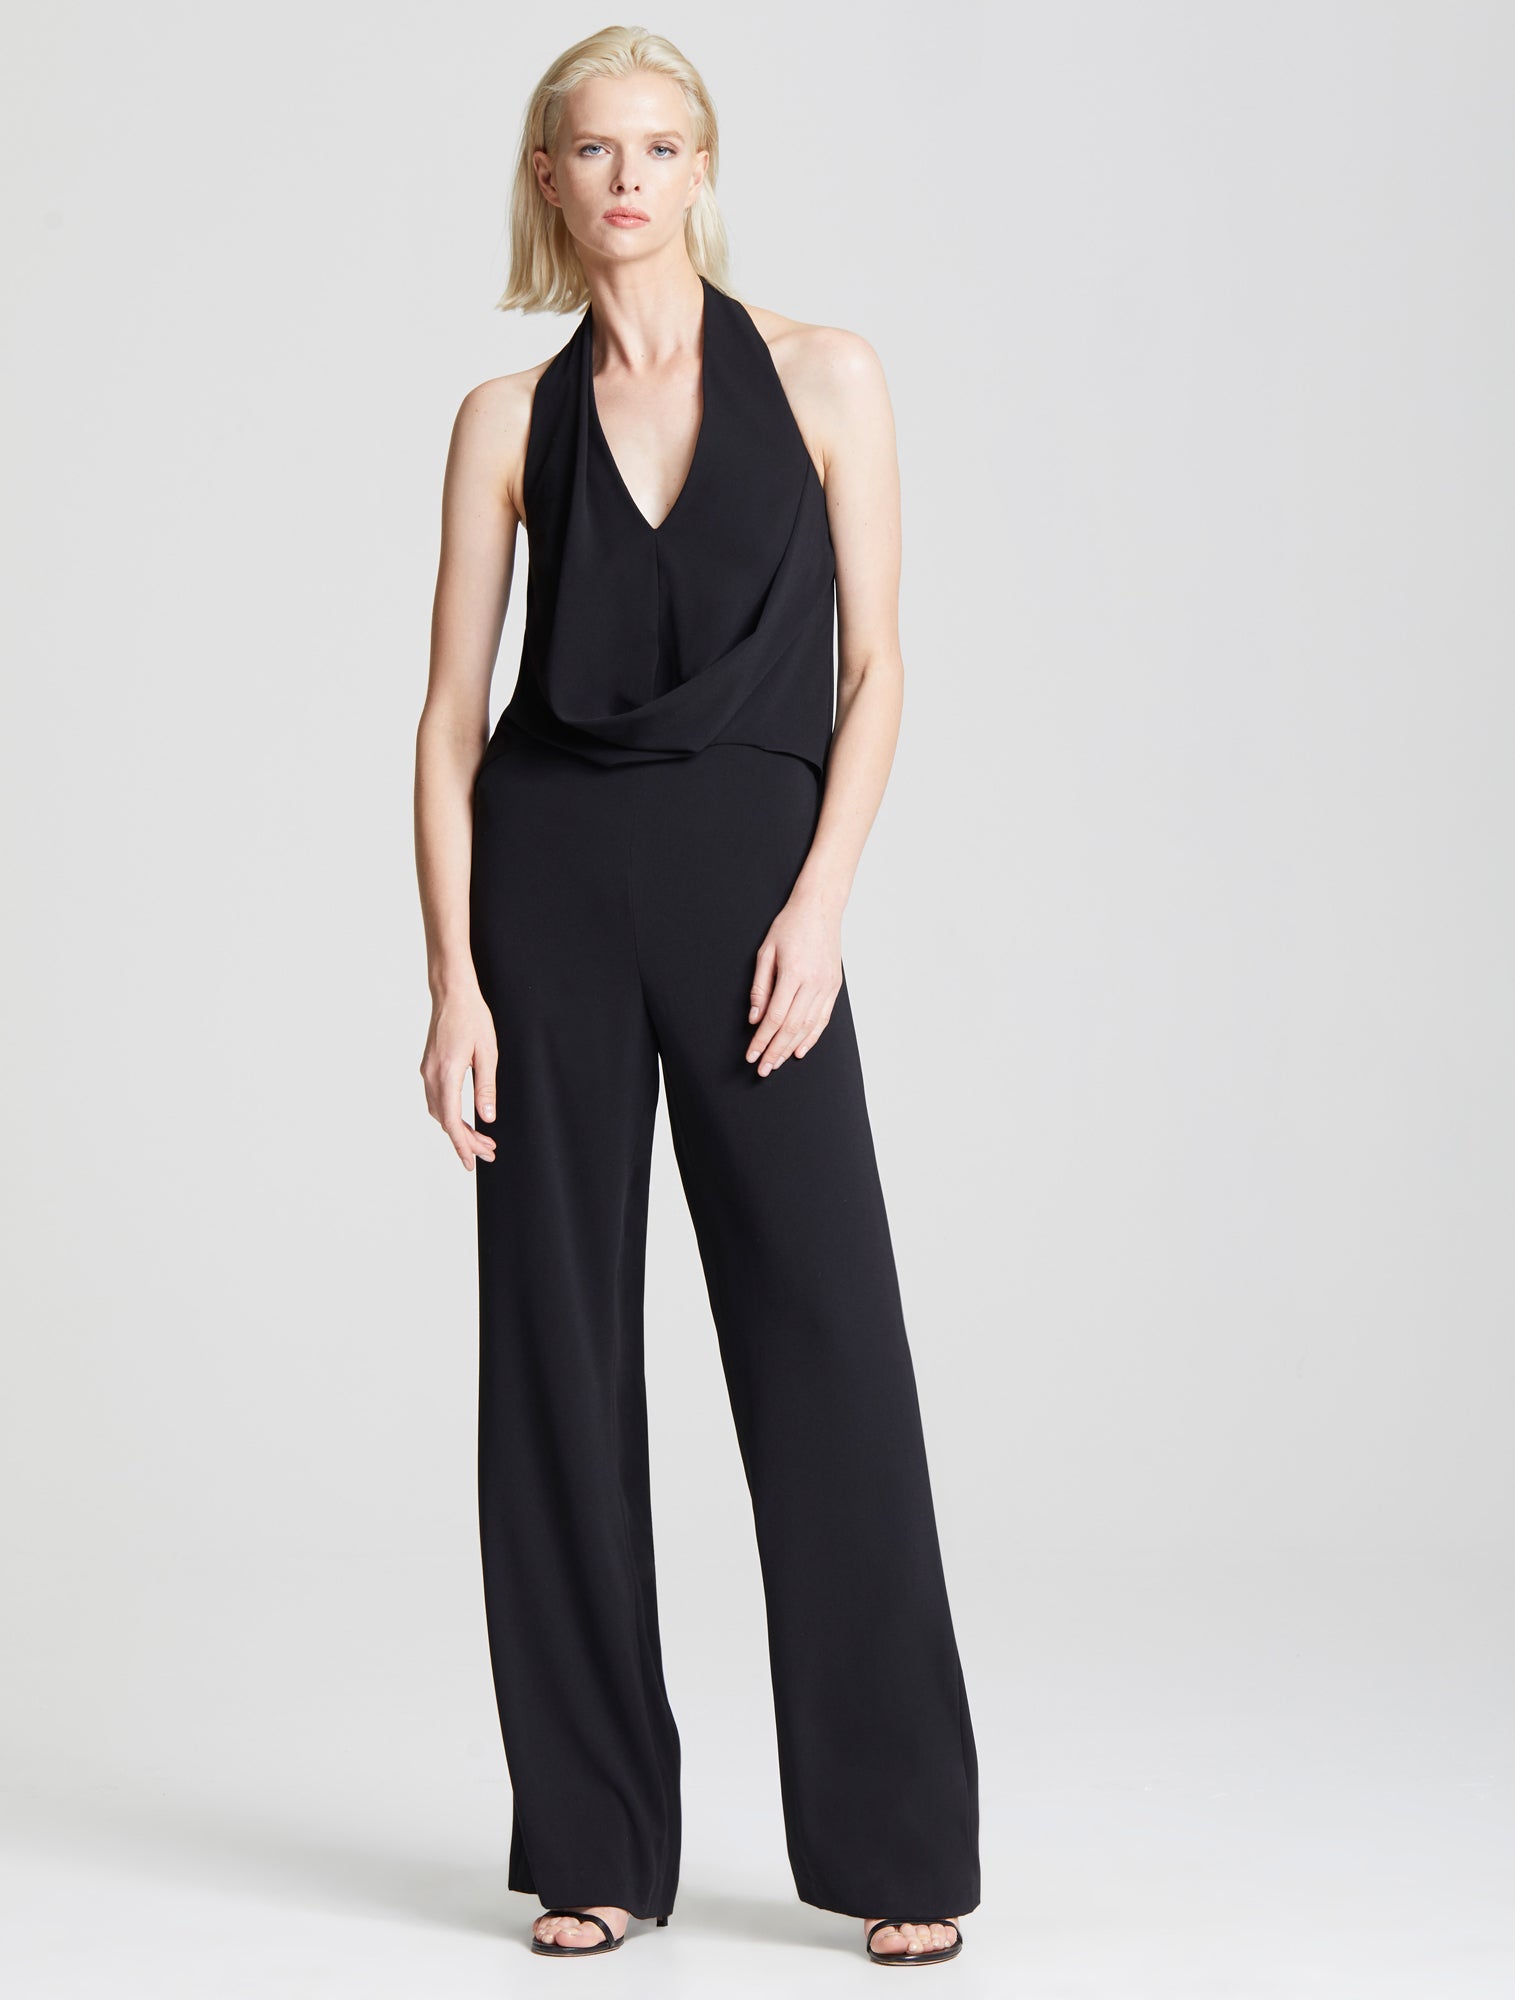 Halston - Drapey Crepe Jumpsuit - 2020 Ready To Wear Collection